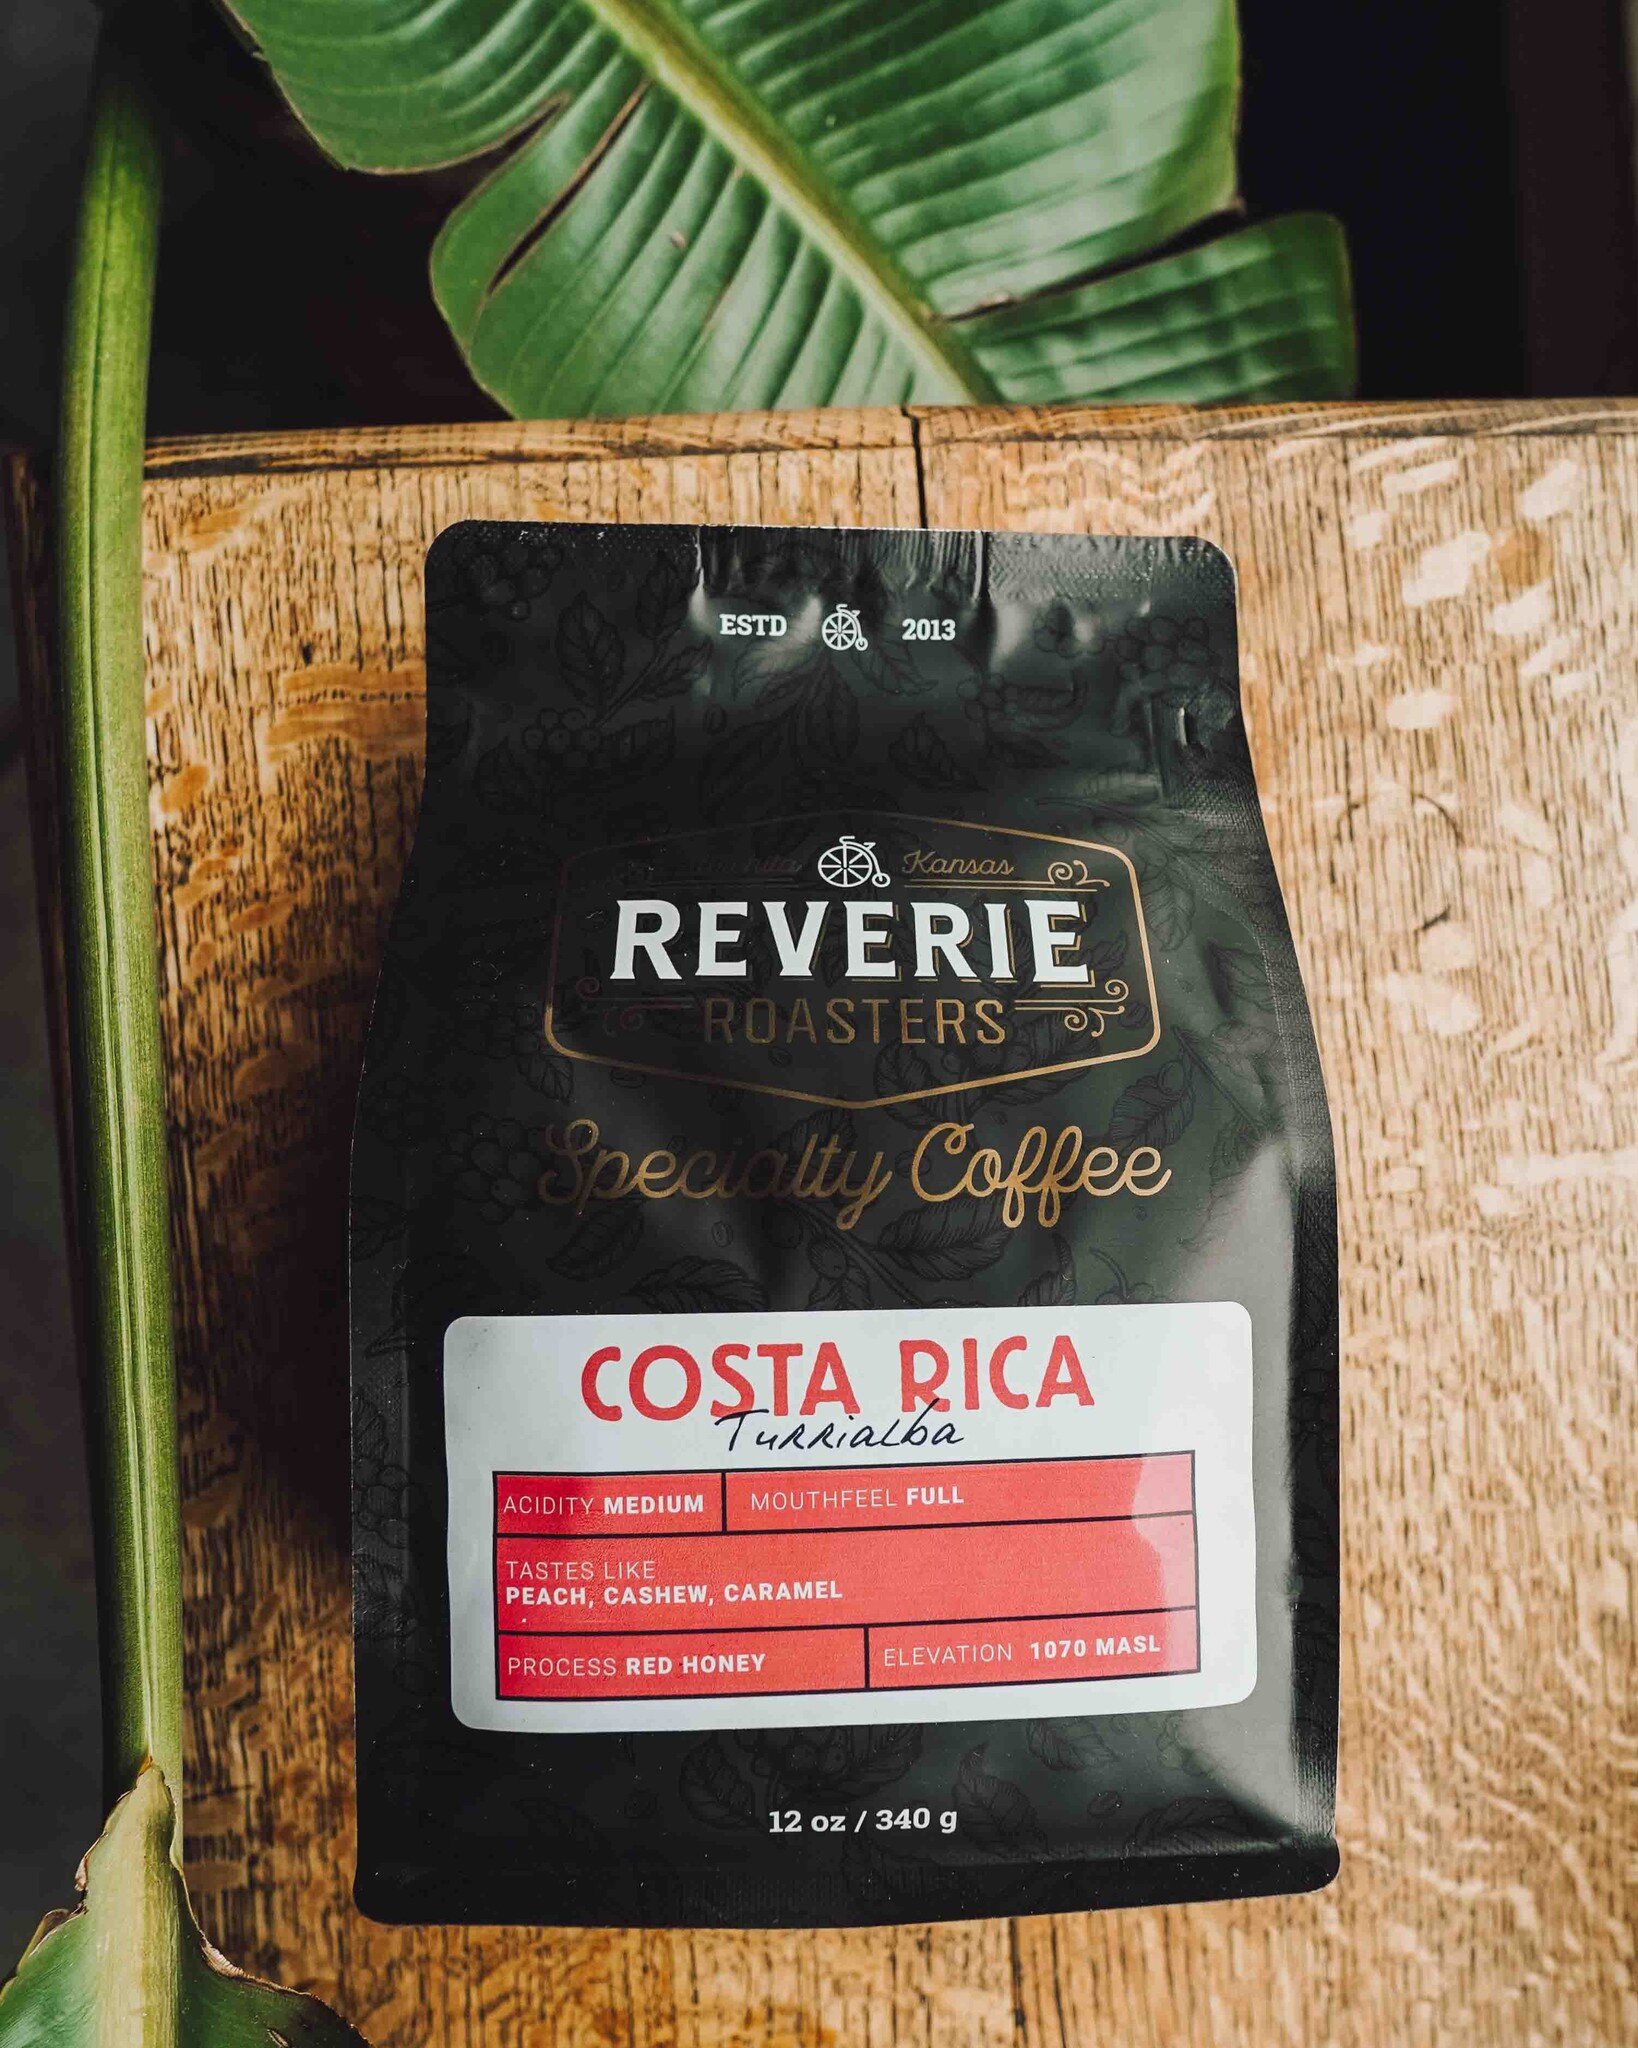 Howdy, dear reader, there is a new sheriff in town. Seriously, though, this new Costa Rican coffee is LAYING DOWN THE LAW.  Owing to the red honey process, this coffee has a robust mouthfeel that undeniably makes a splash. Caramel undertones and note